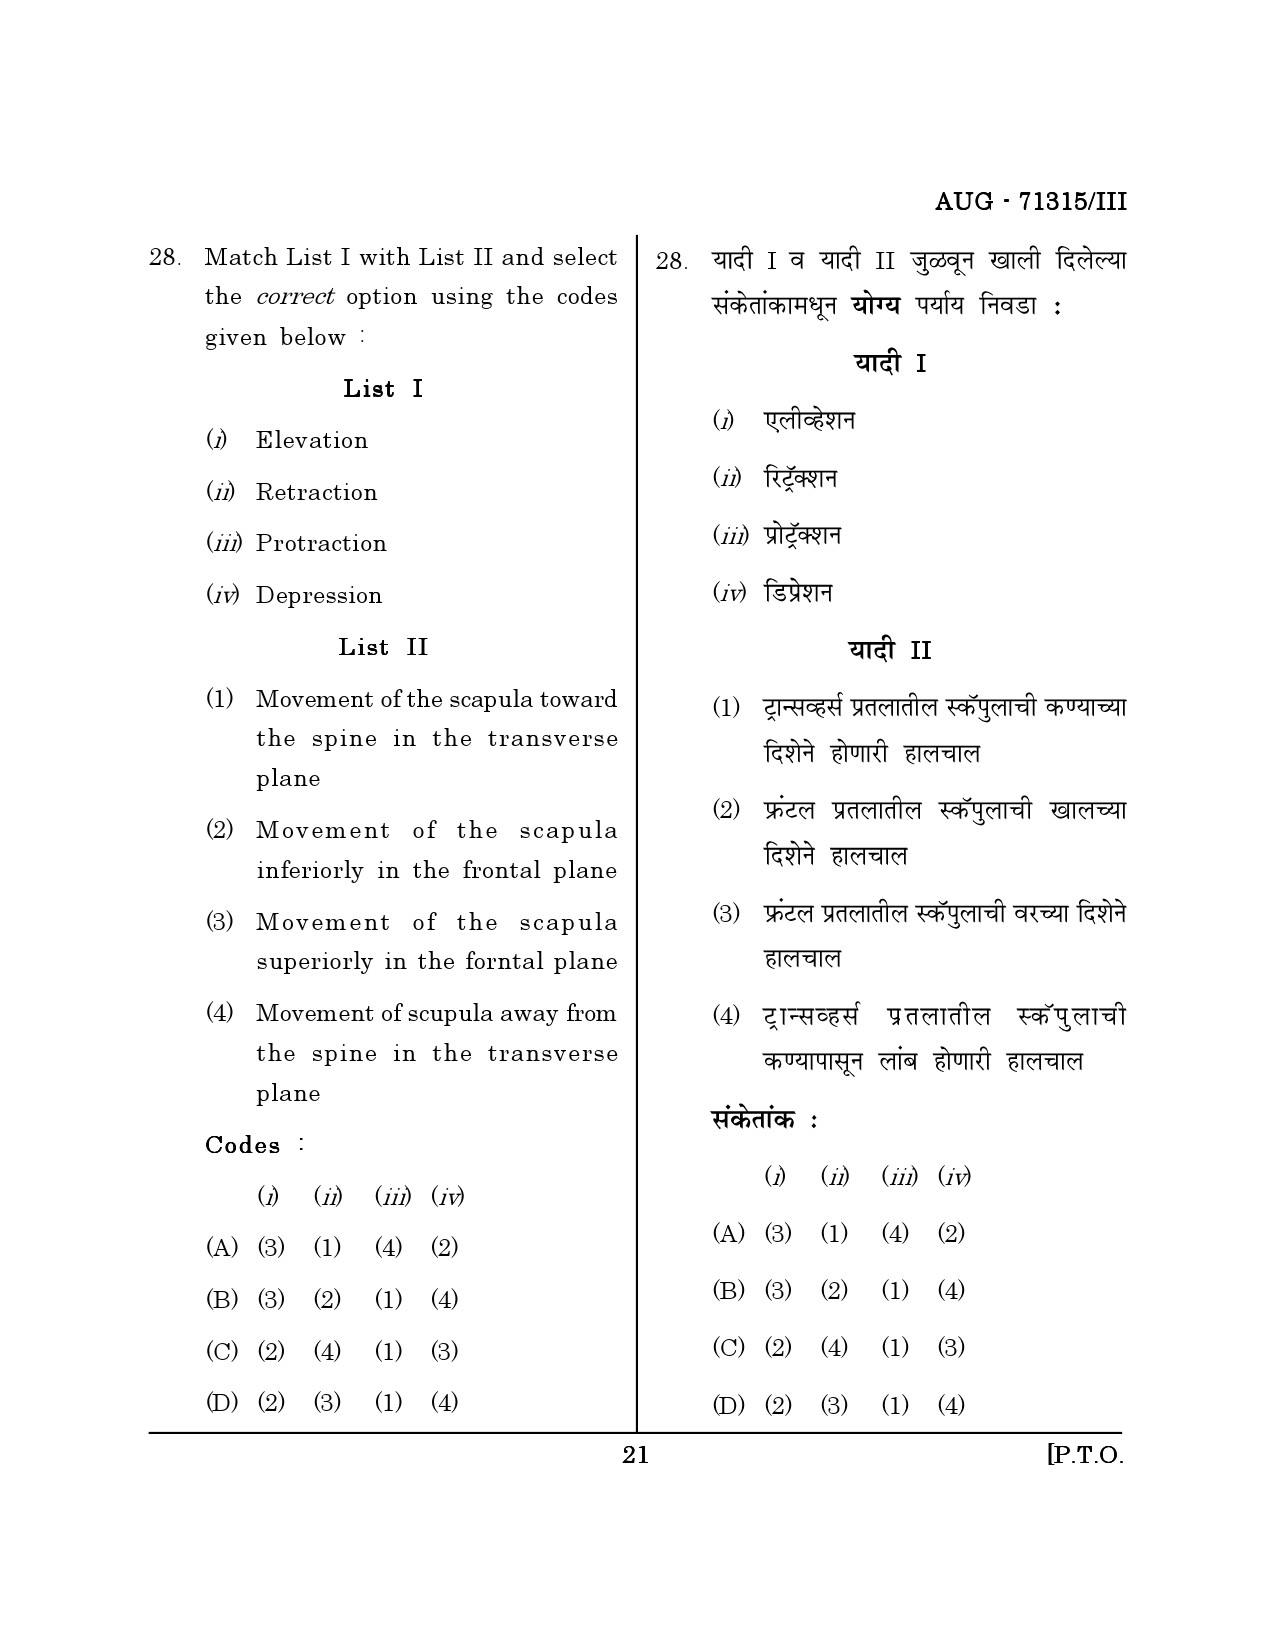 Maharashtra SET Physical Education Question Paper III August 2015 20